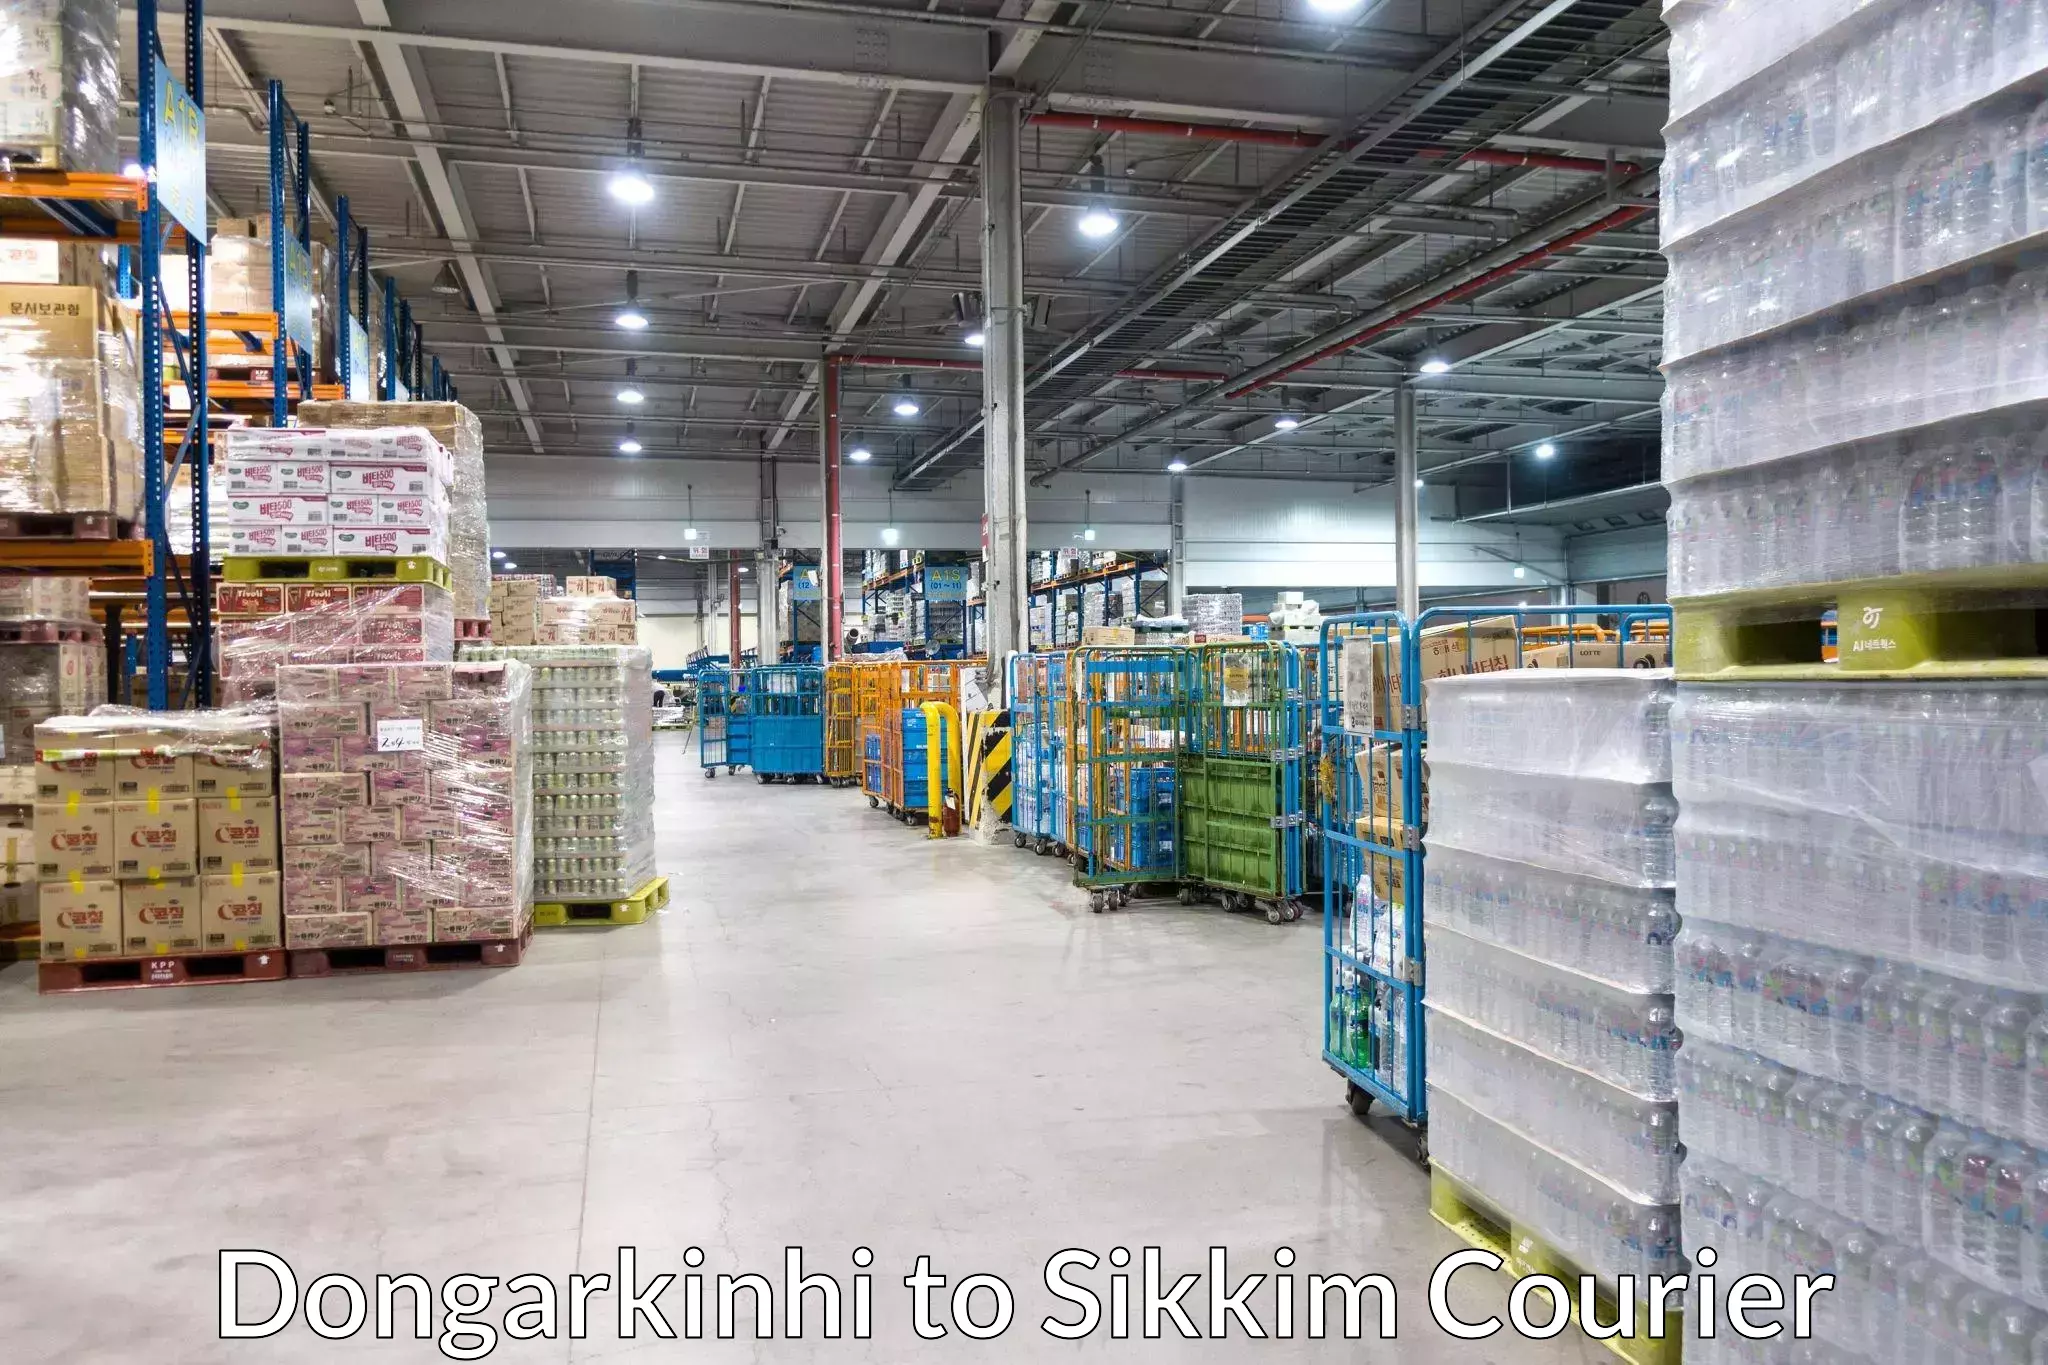 Quality courier partnerships Dongarkinhi to West Sikkim